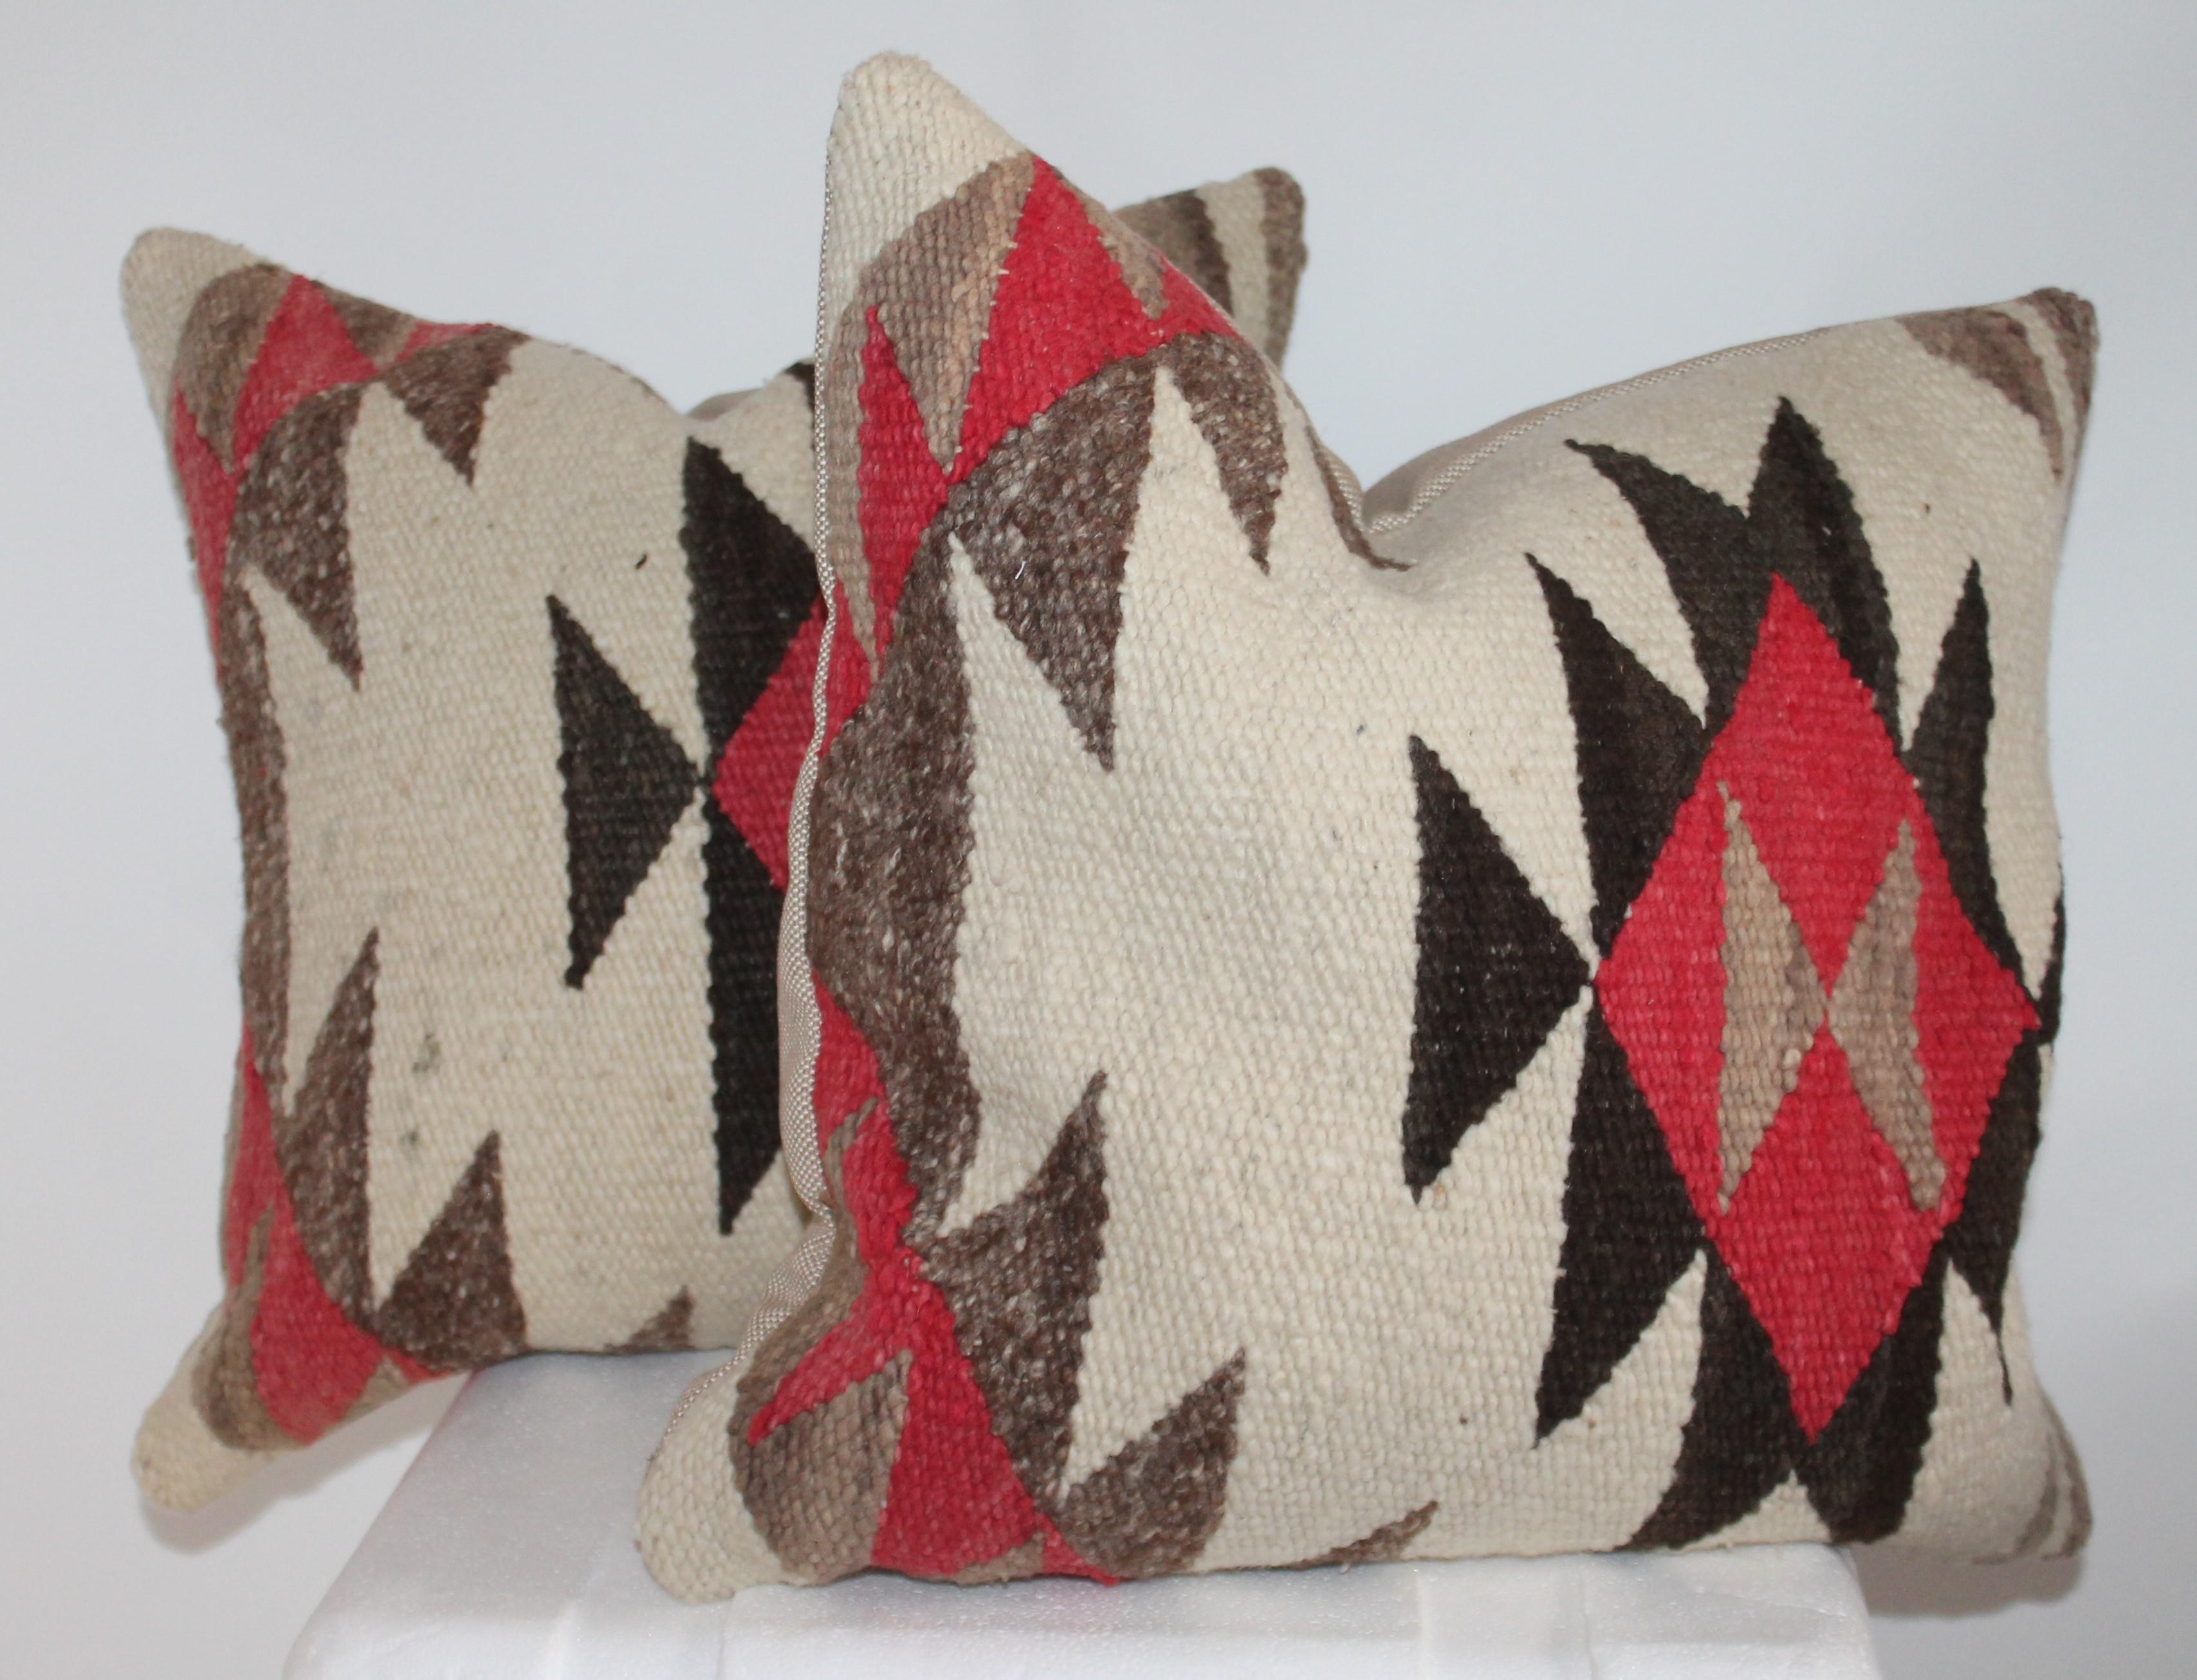 These geometric Navajo Indian weaving pillows are in fine condition. Sold as a pair. The backing is in a natural linen and inserts are down and feather fill.